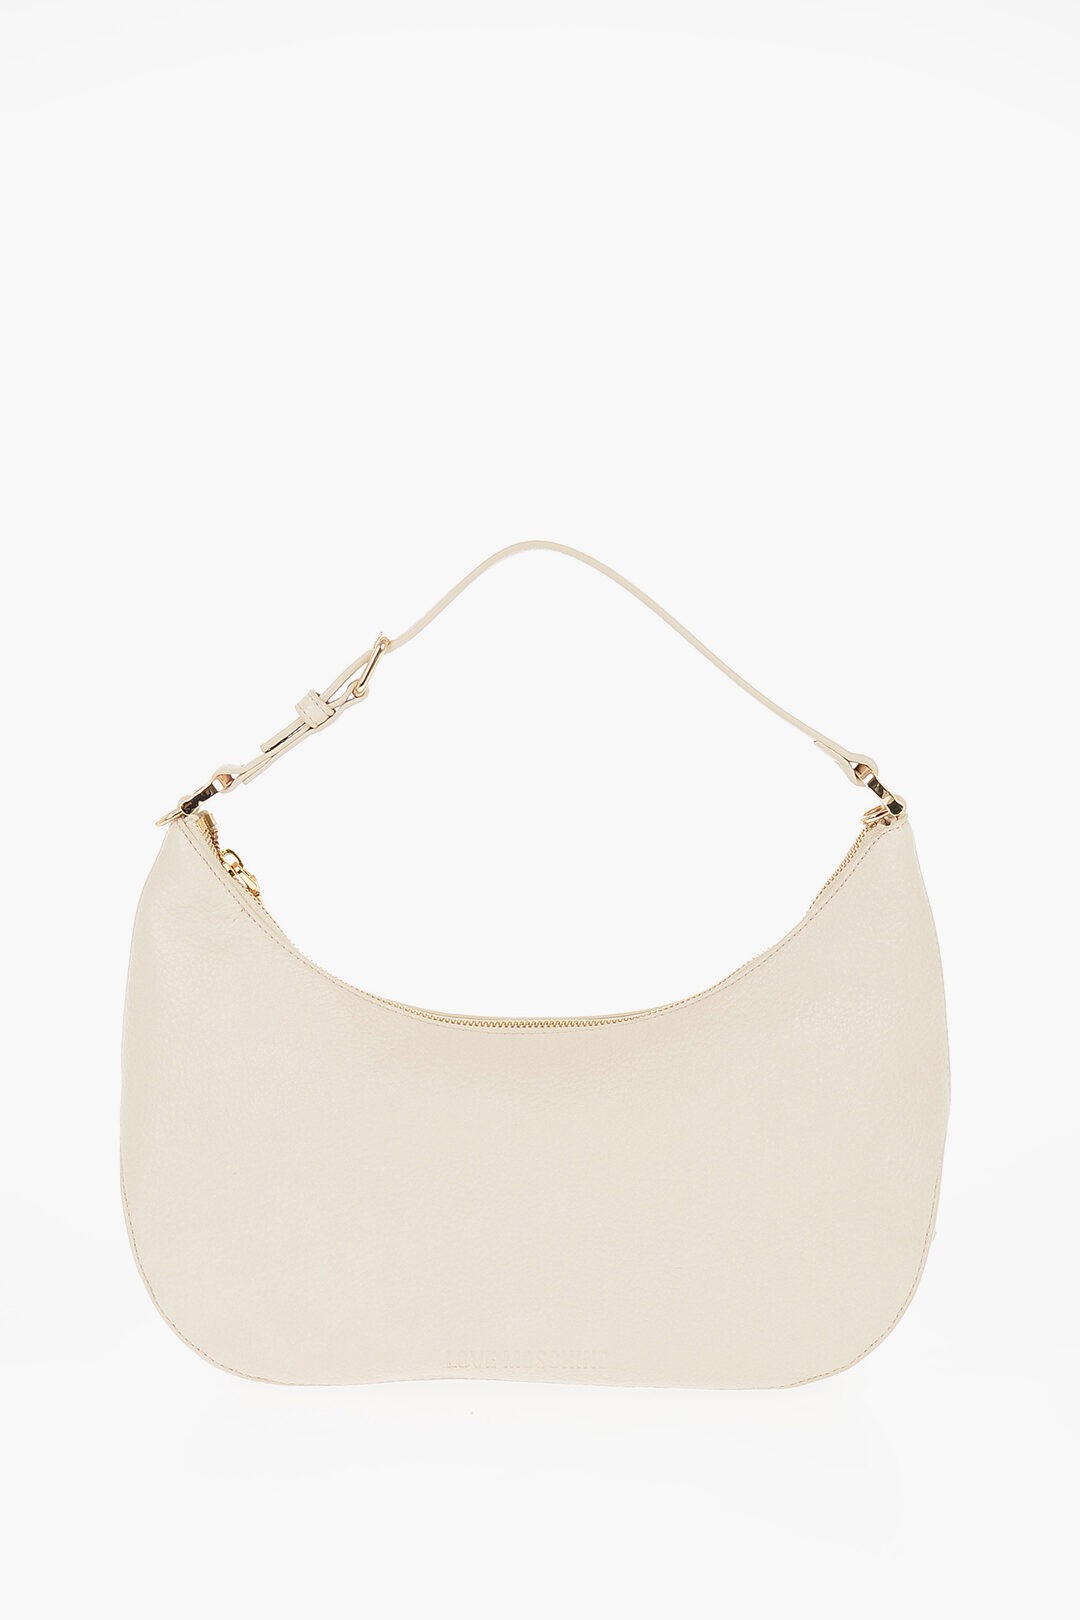 1ϥȥ꡼ǥݥ3ܡ MOSCHINO ⥹ Хå JC4017PP1HLT0110 ǥ LOVE TEXTURED FAUX LEATHER ECO-FRIENDLY GIANT HOBO BAG WITH ڴǡ̵ۡڥåԥ̵ dk